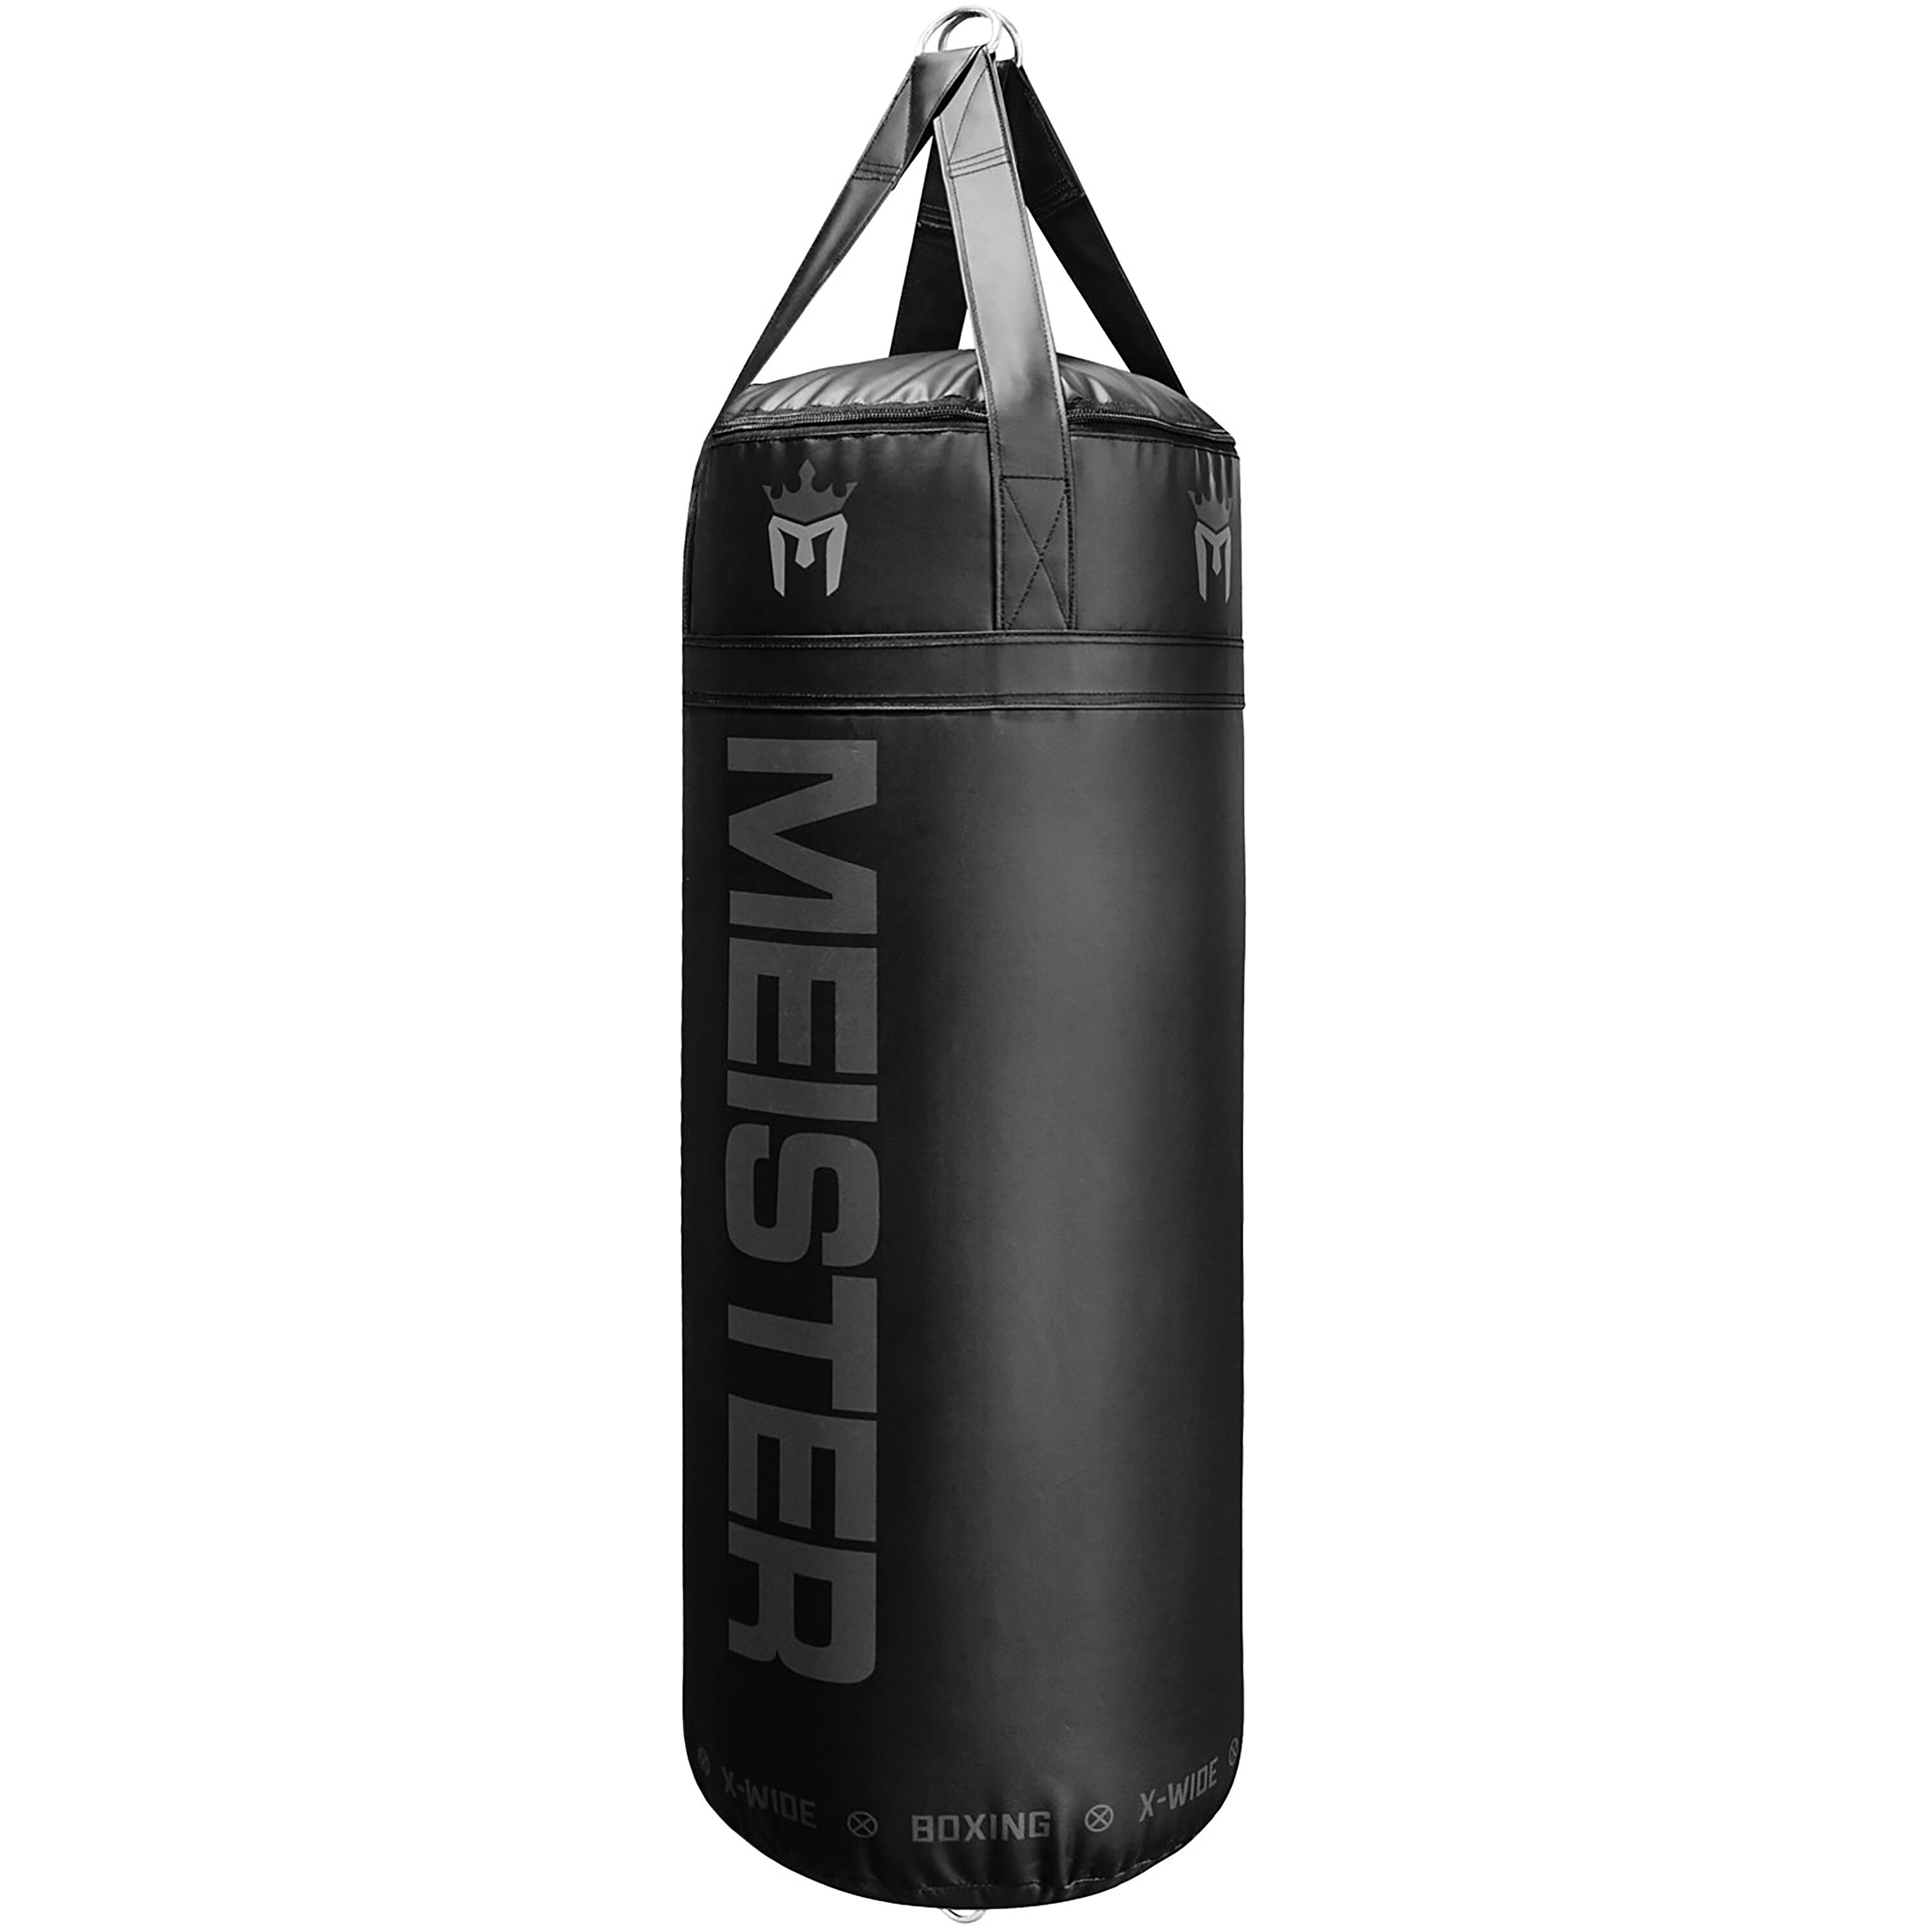 Meister 90lb Filled X-Wide Boxing Heavy Bag w/Double-End Attachment